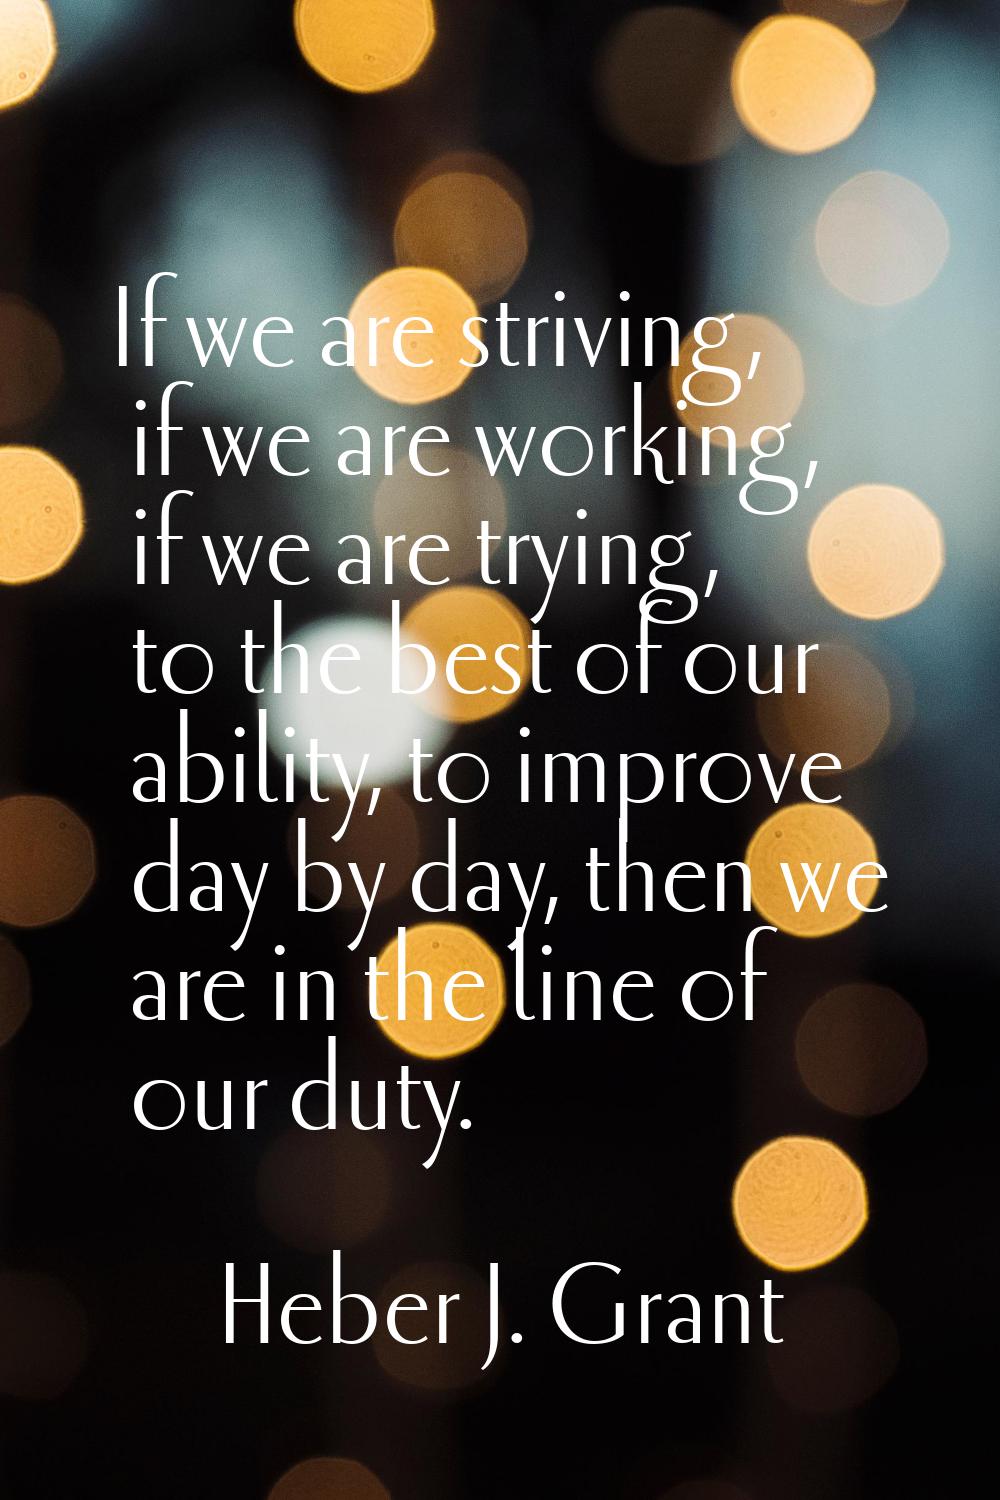 If we are striving, if we are working, if we are trying, to the best of our ability, to improve day